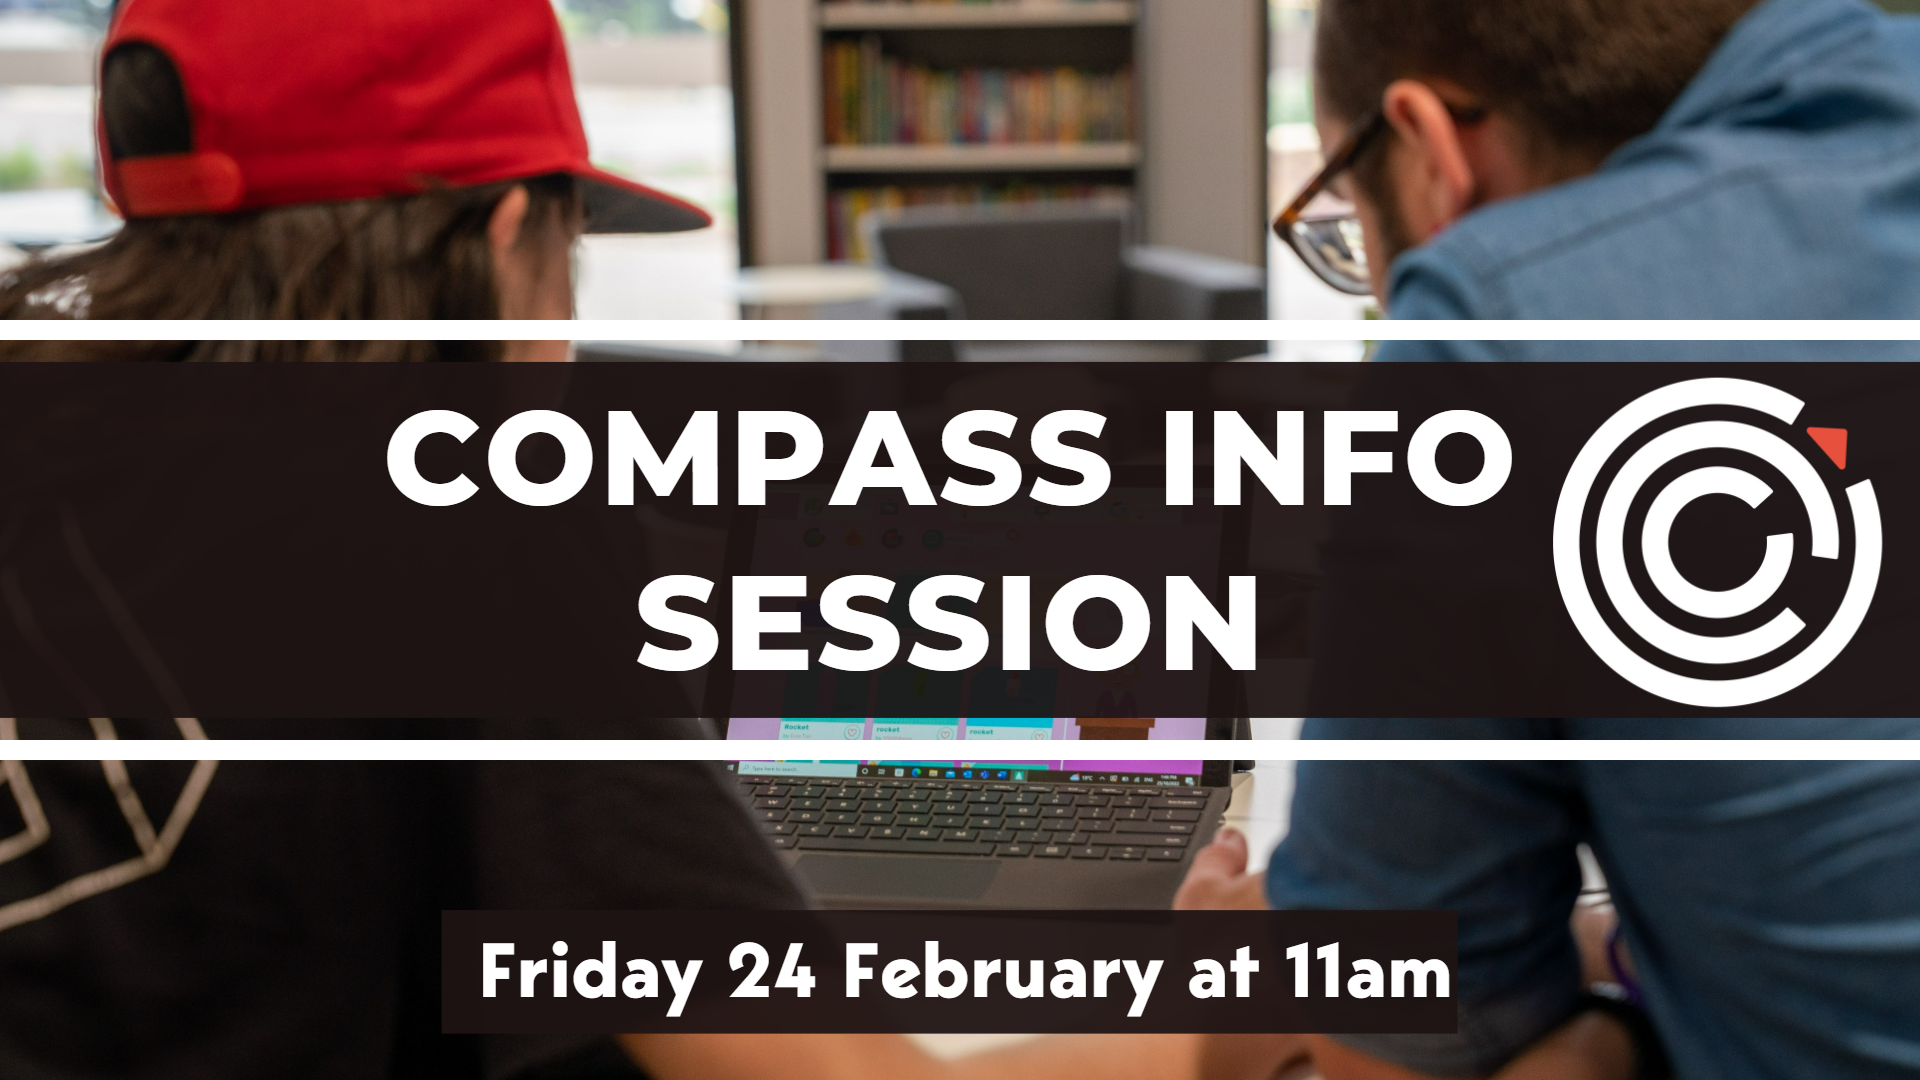 Compass Info Session - Friday 24 February 